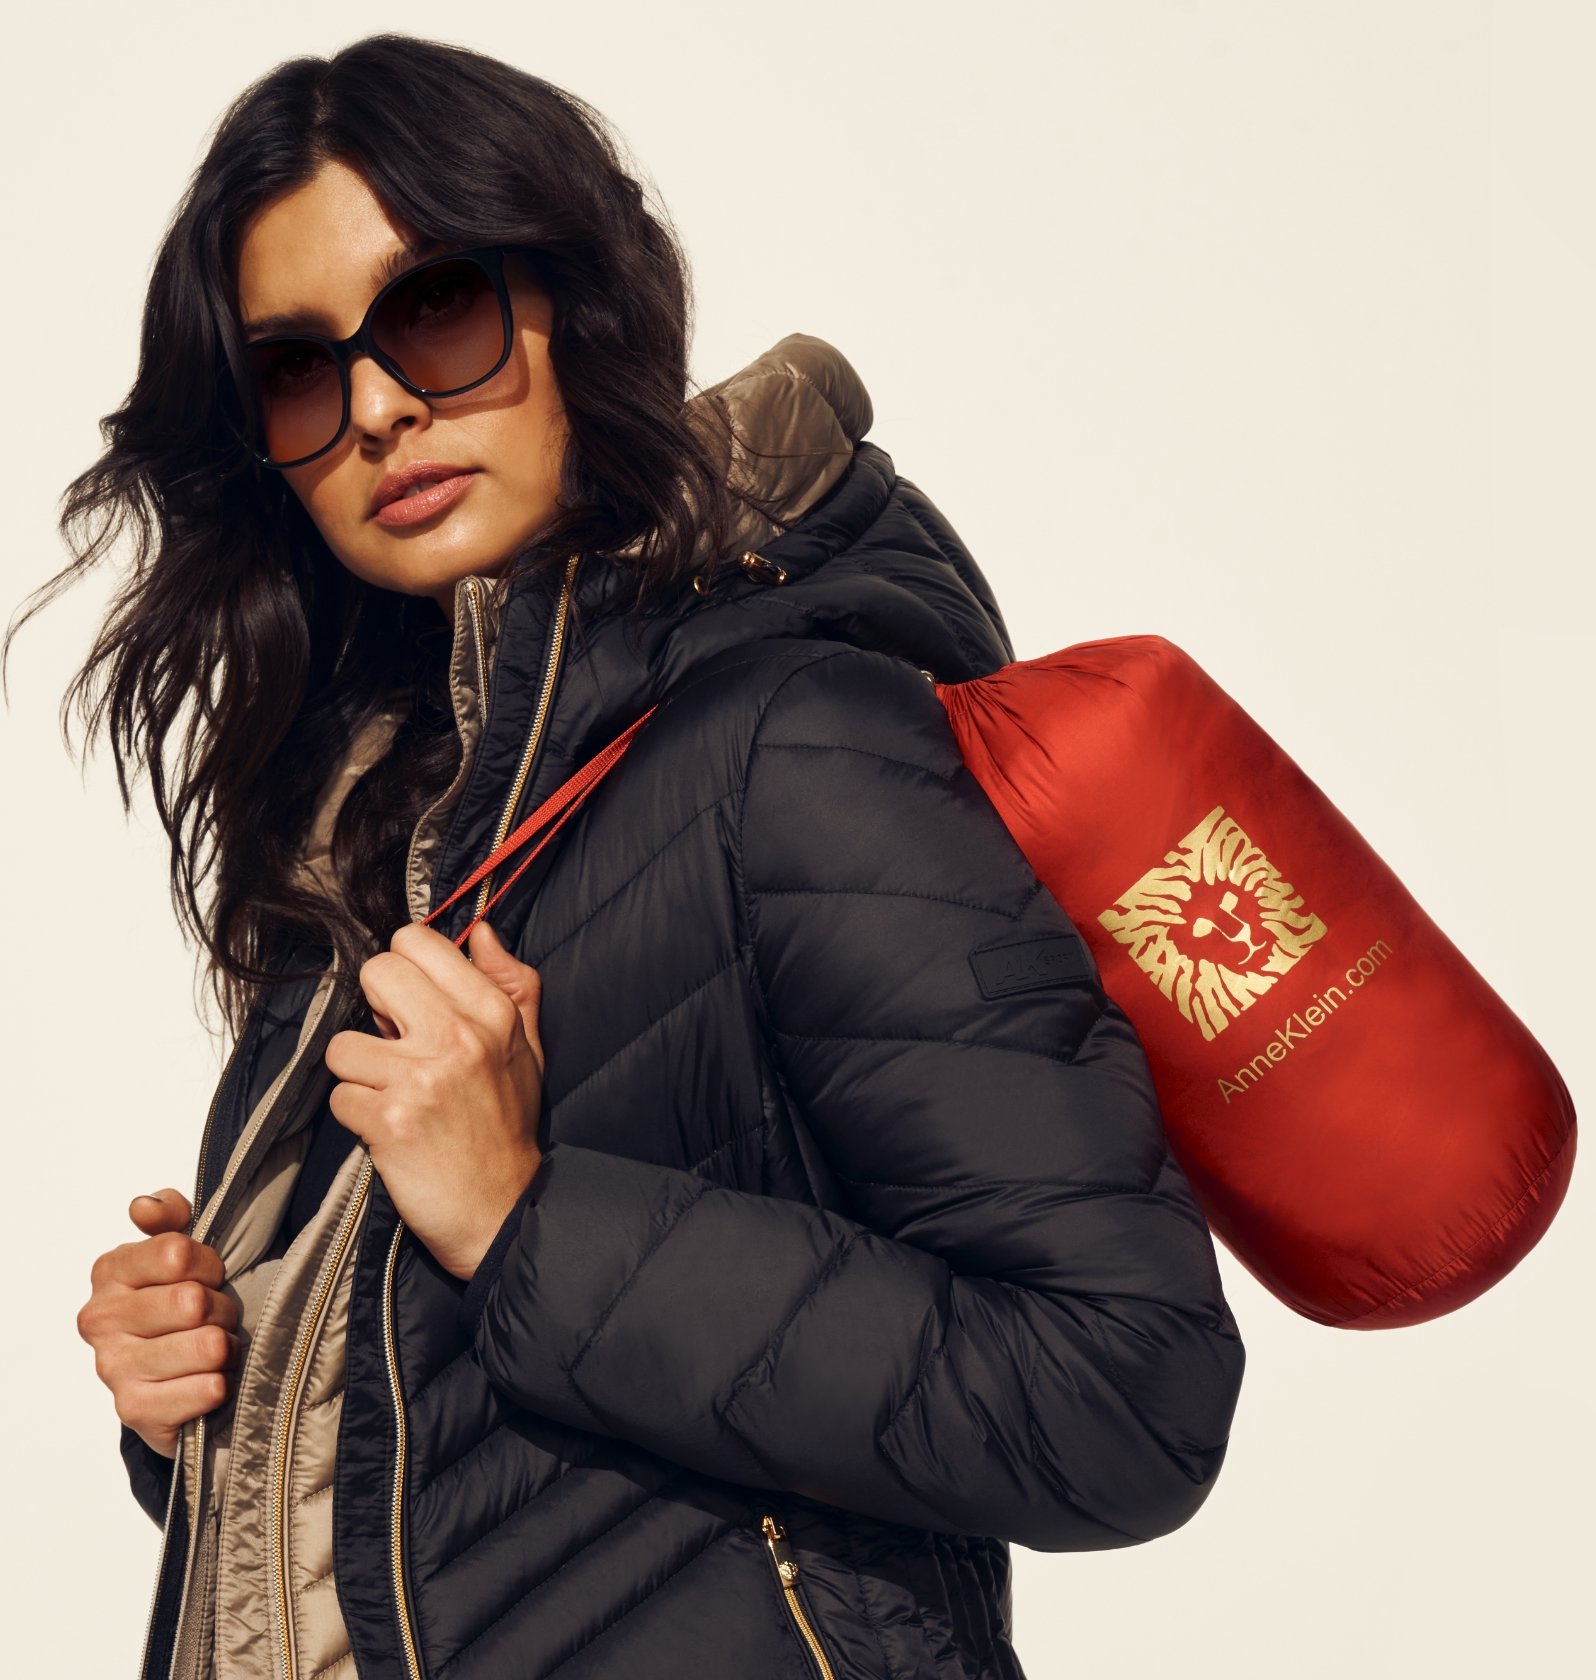 Anne Klein Model in Layered Puffers and sunglasses holding packable puffer